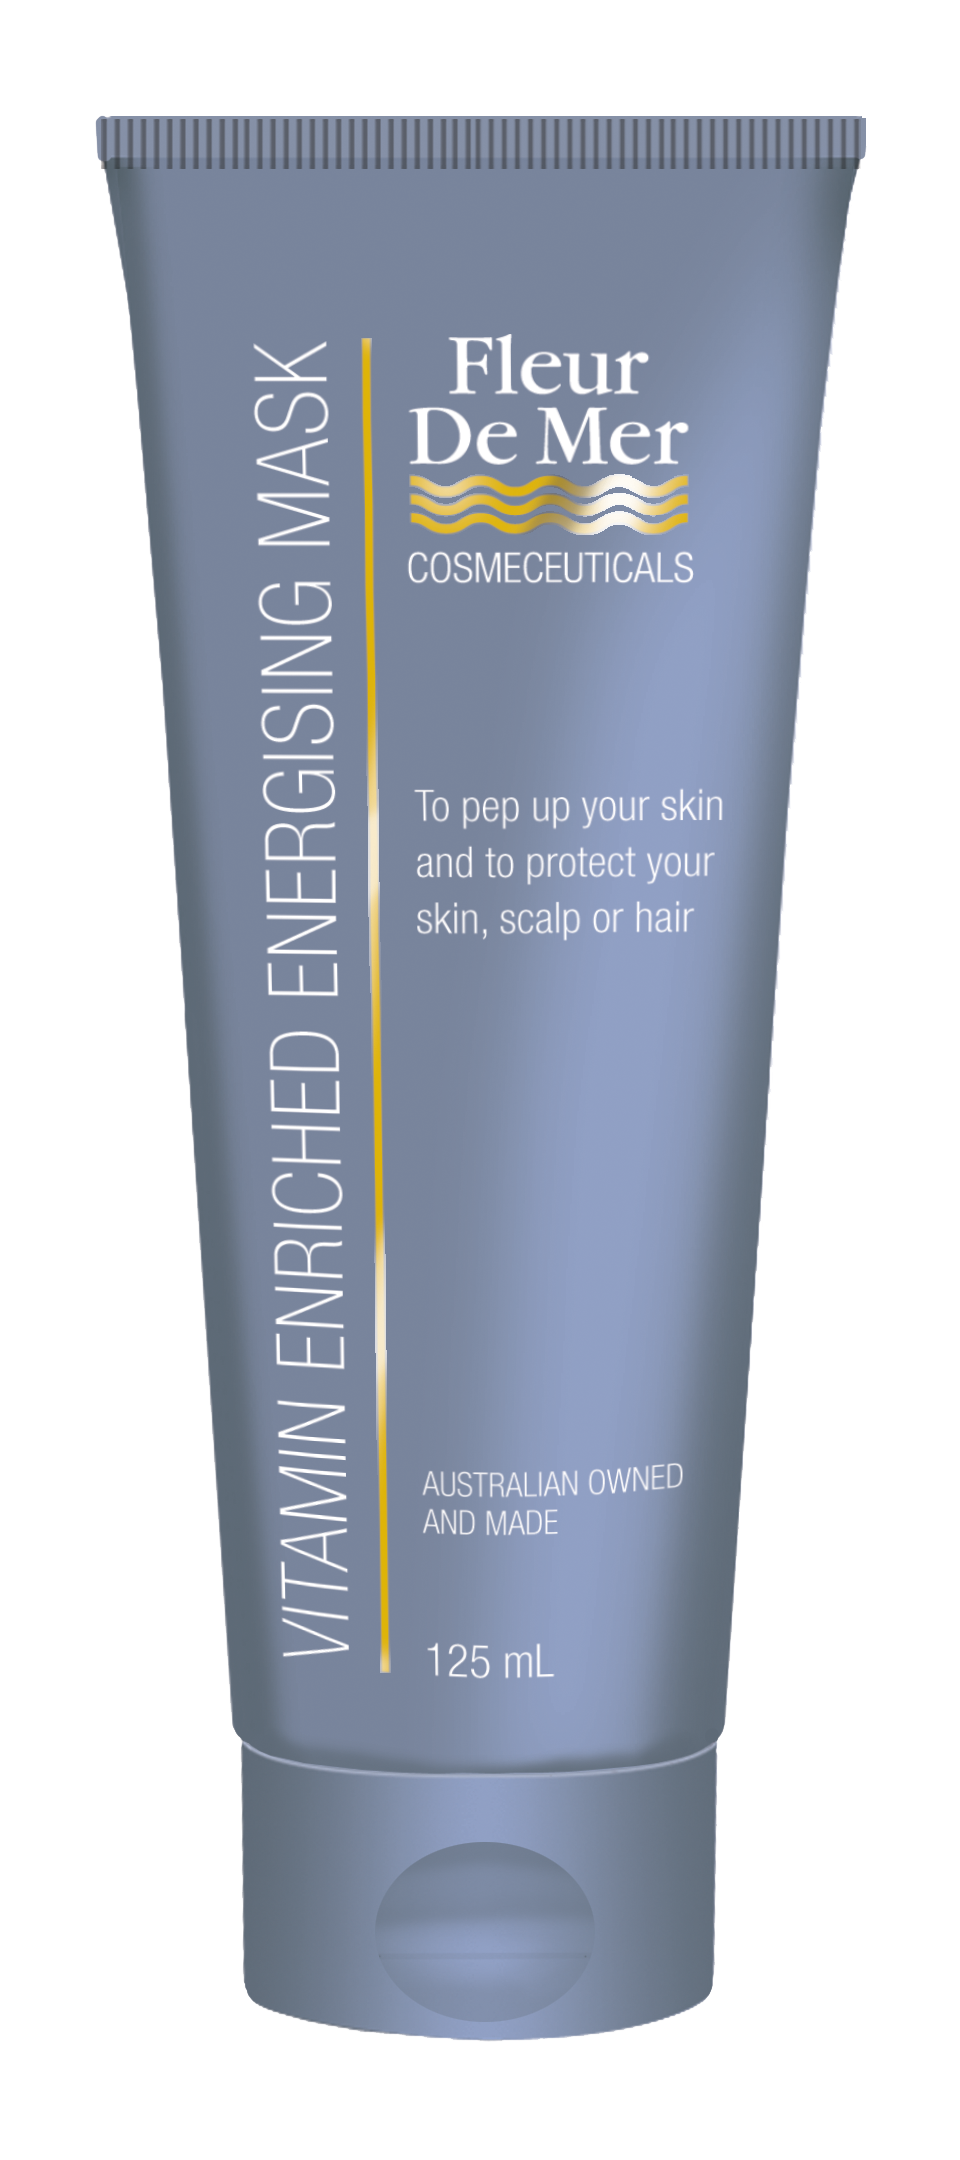 VITAMIN ENRICHED ENERGISING MASK To pep up your skin. All skin types